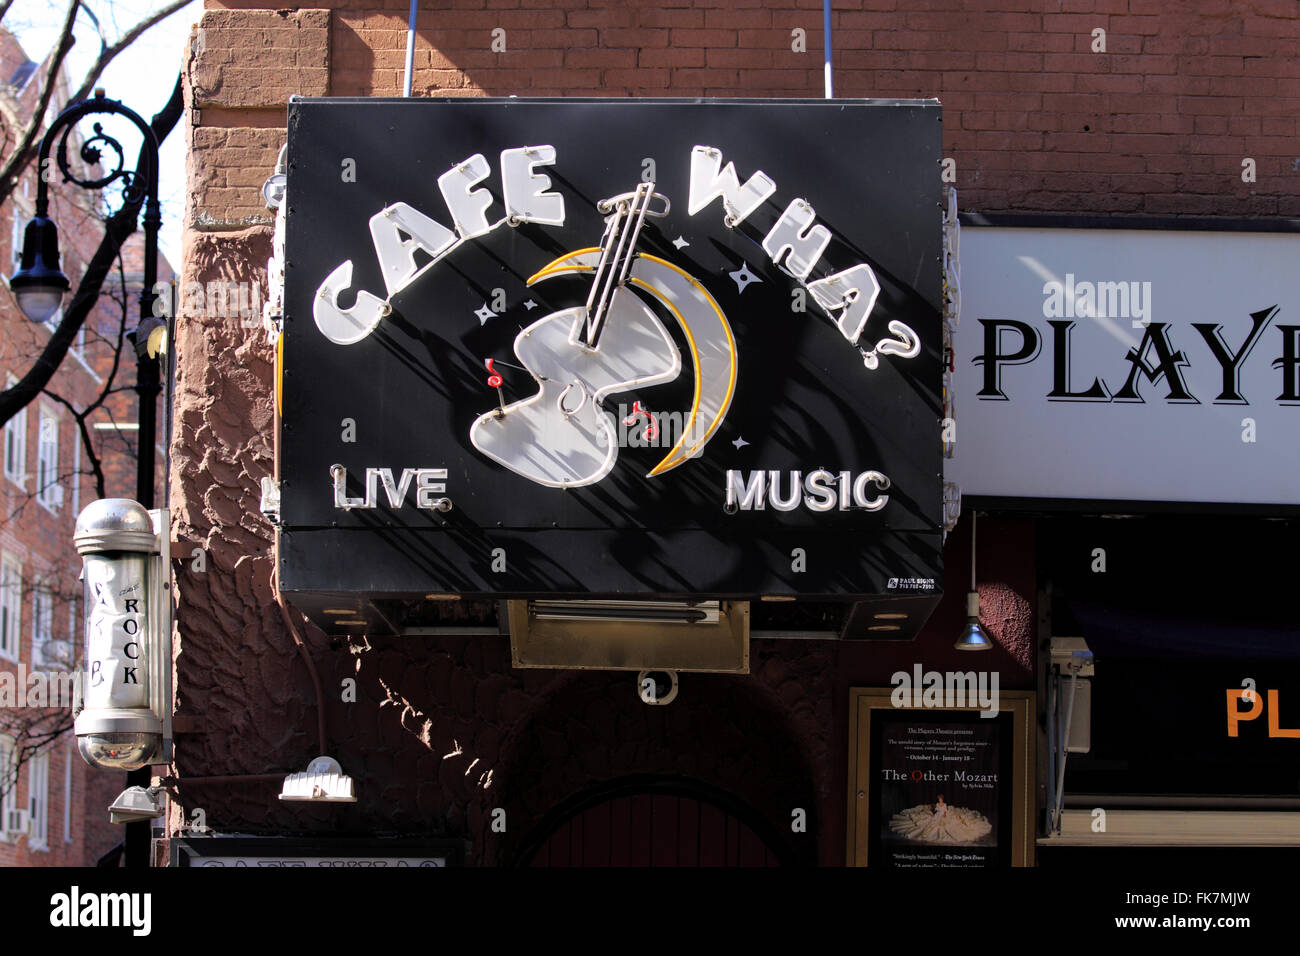 Cafe Wha cafe and music house Greenwich Village New York City Stock Photo